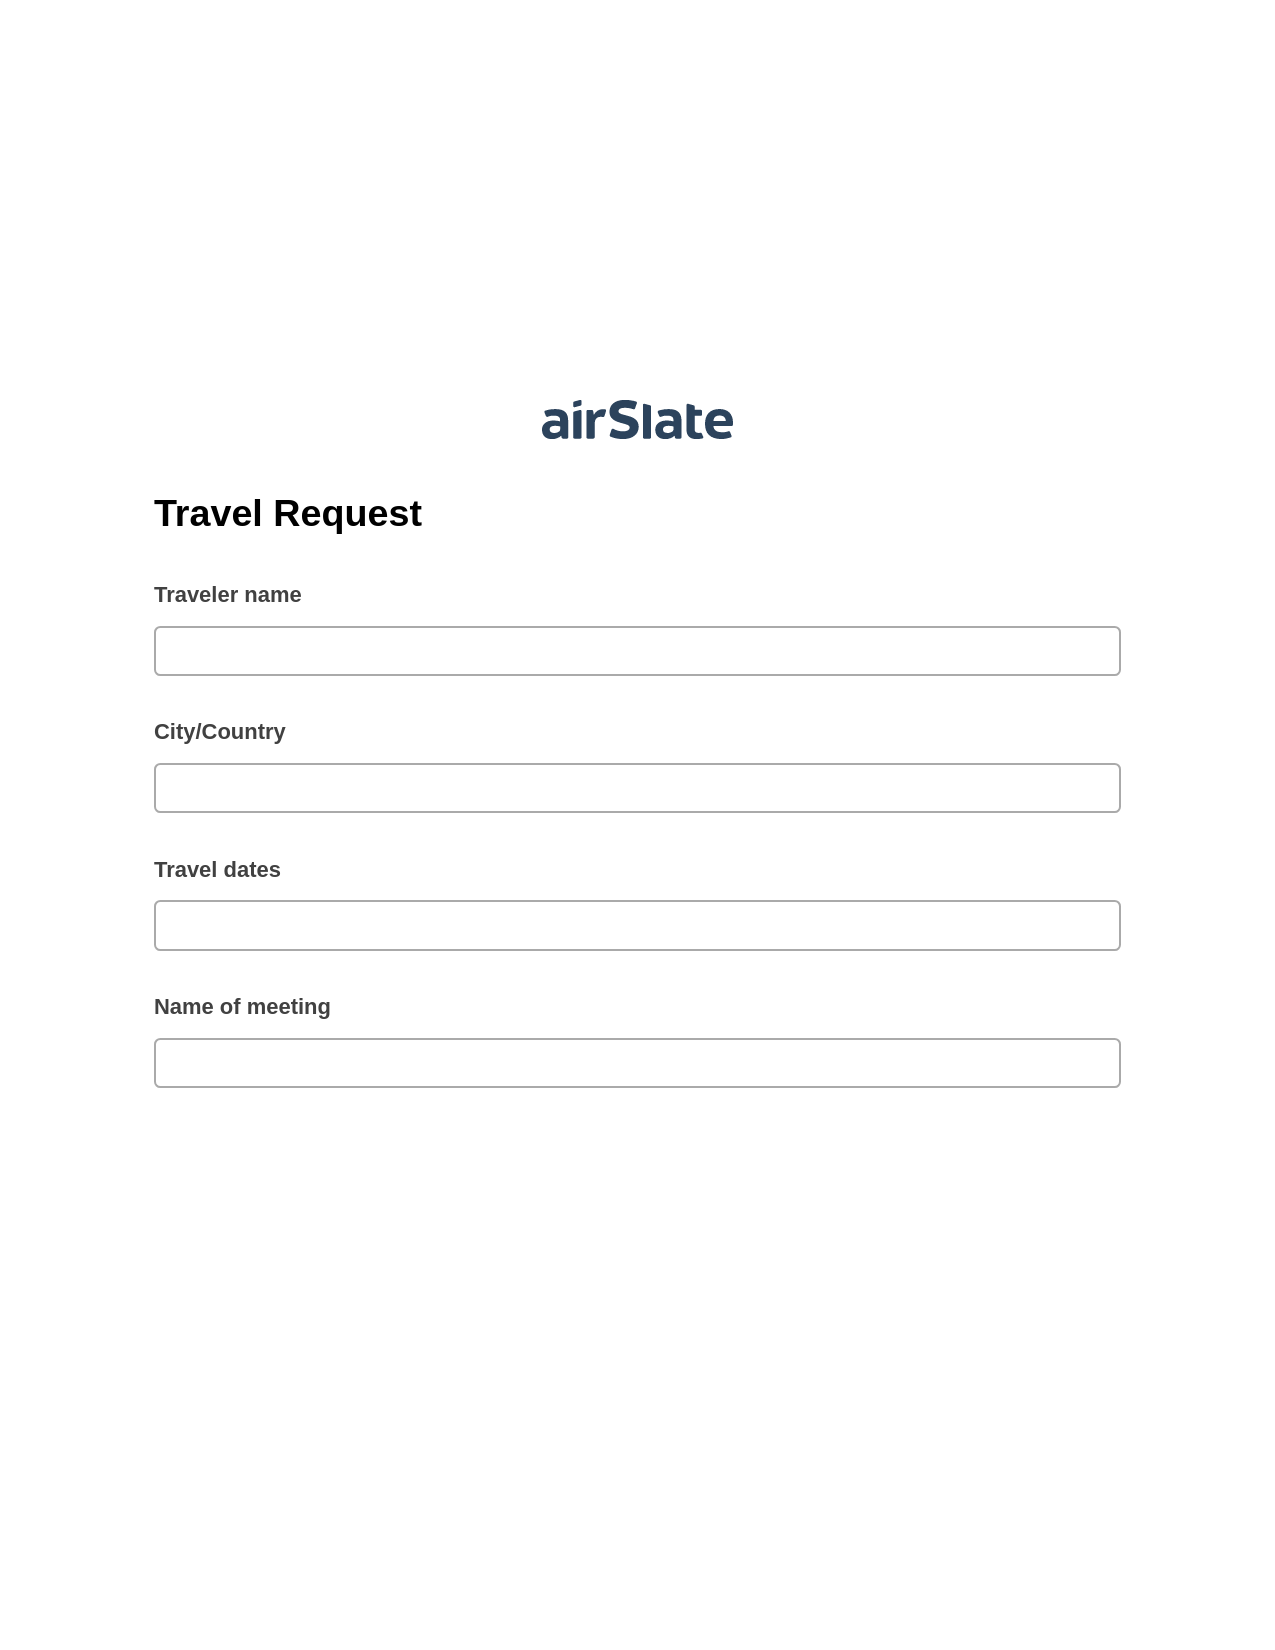 Multirole Travel Request Pre-fill from Salesforce Record Bot, Create slate from another Flow Bot, Post-finish Document Bot